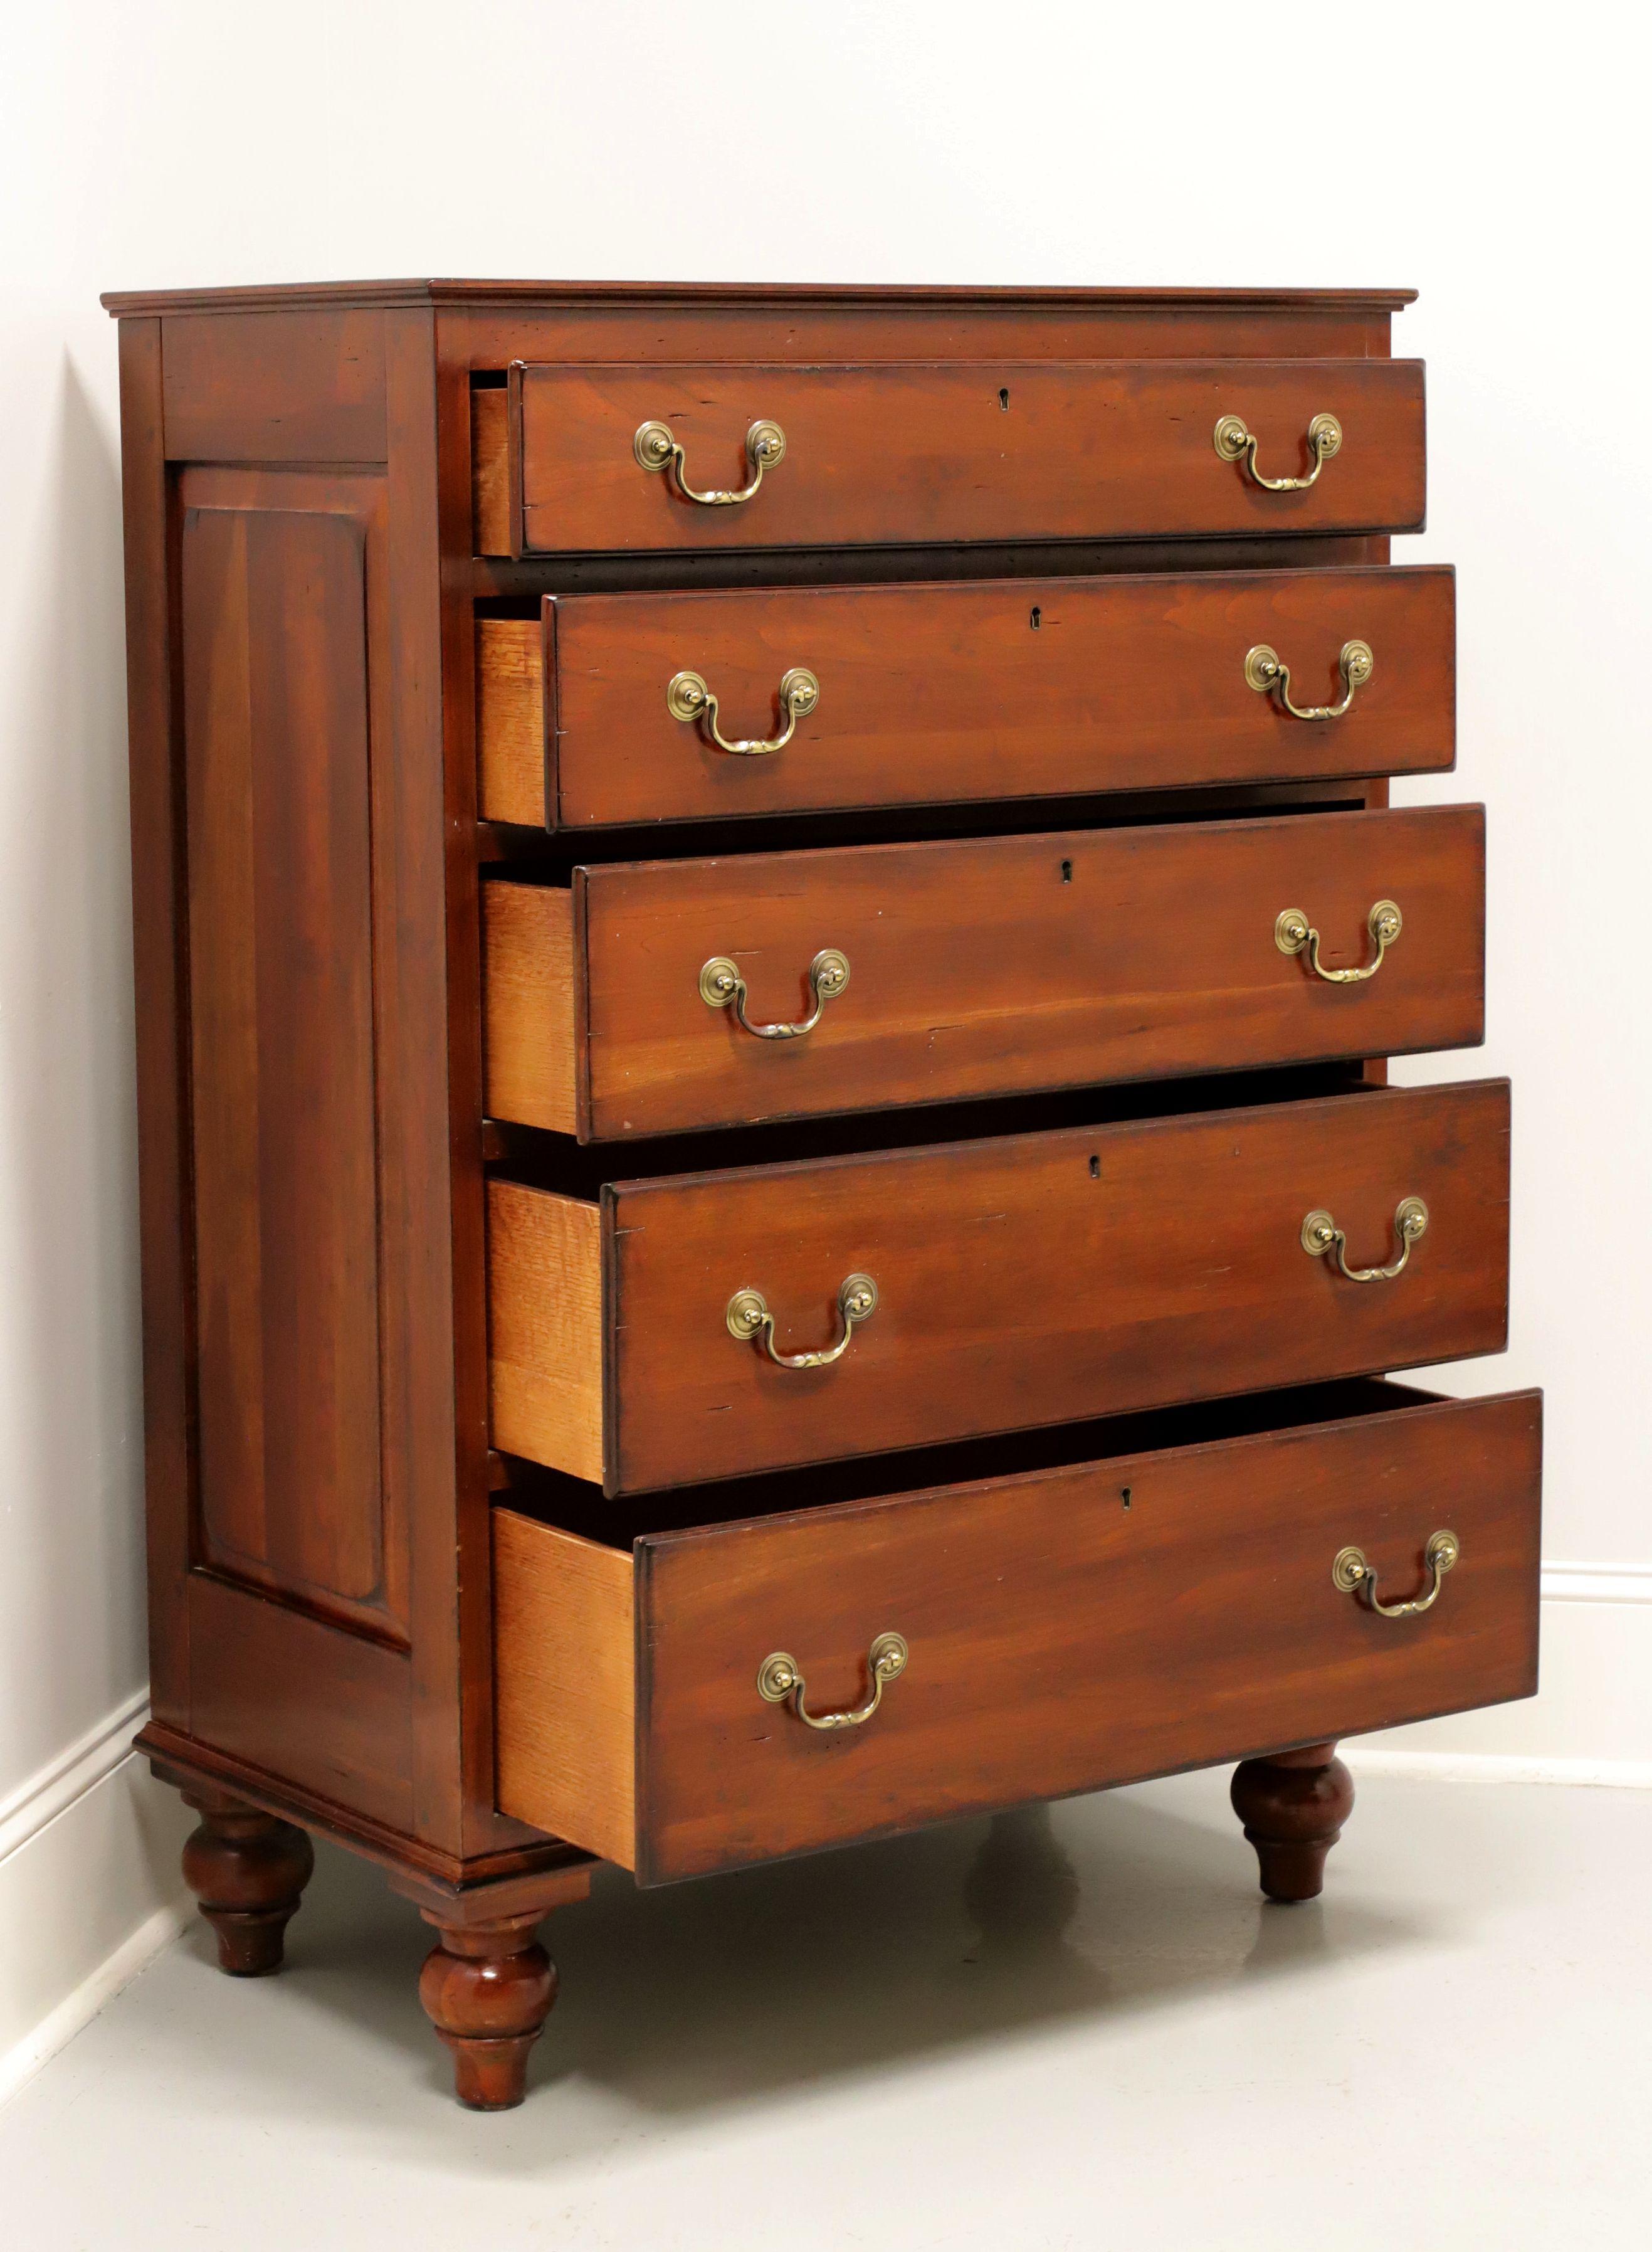 American LEXINGTON Bob Timberlake Solid Cherry Chippendale Chest of Drawers